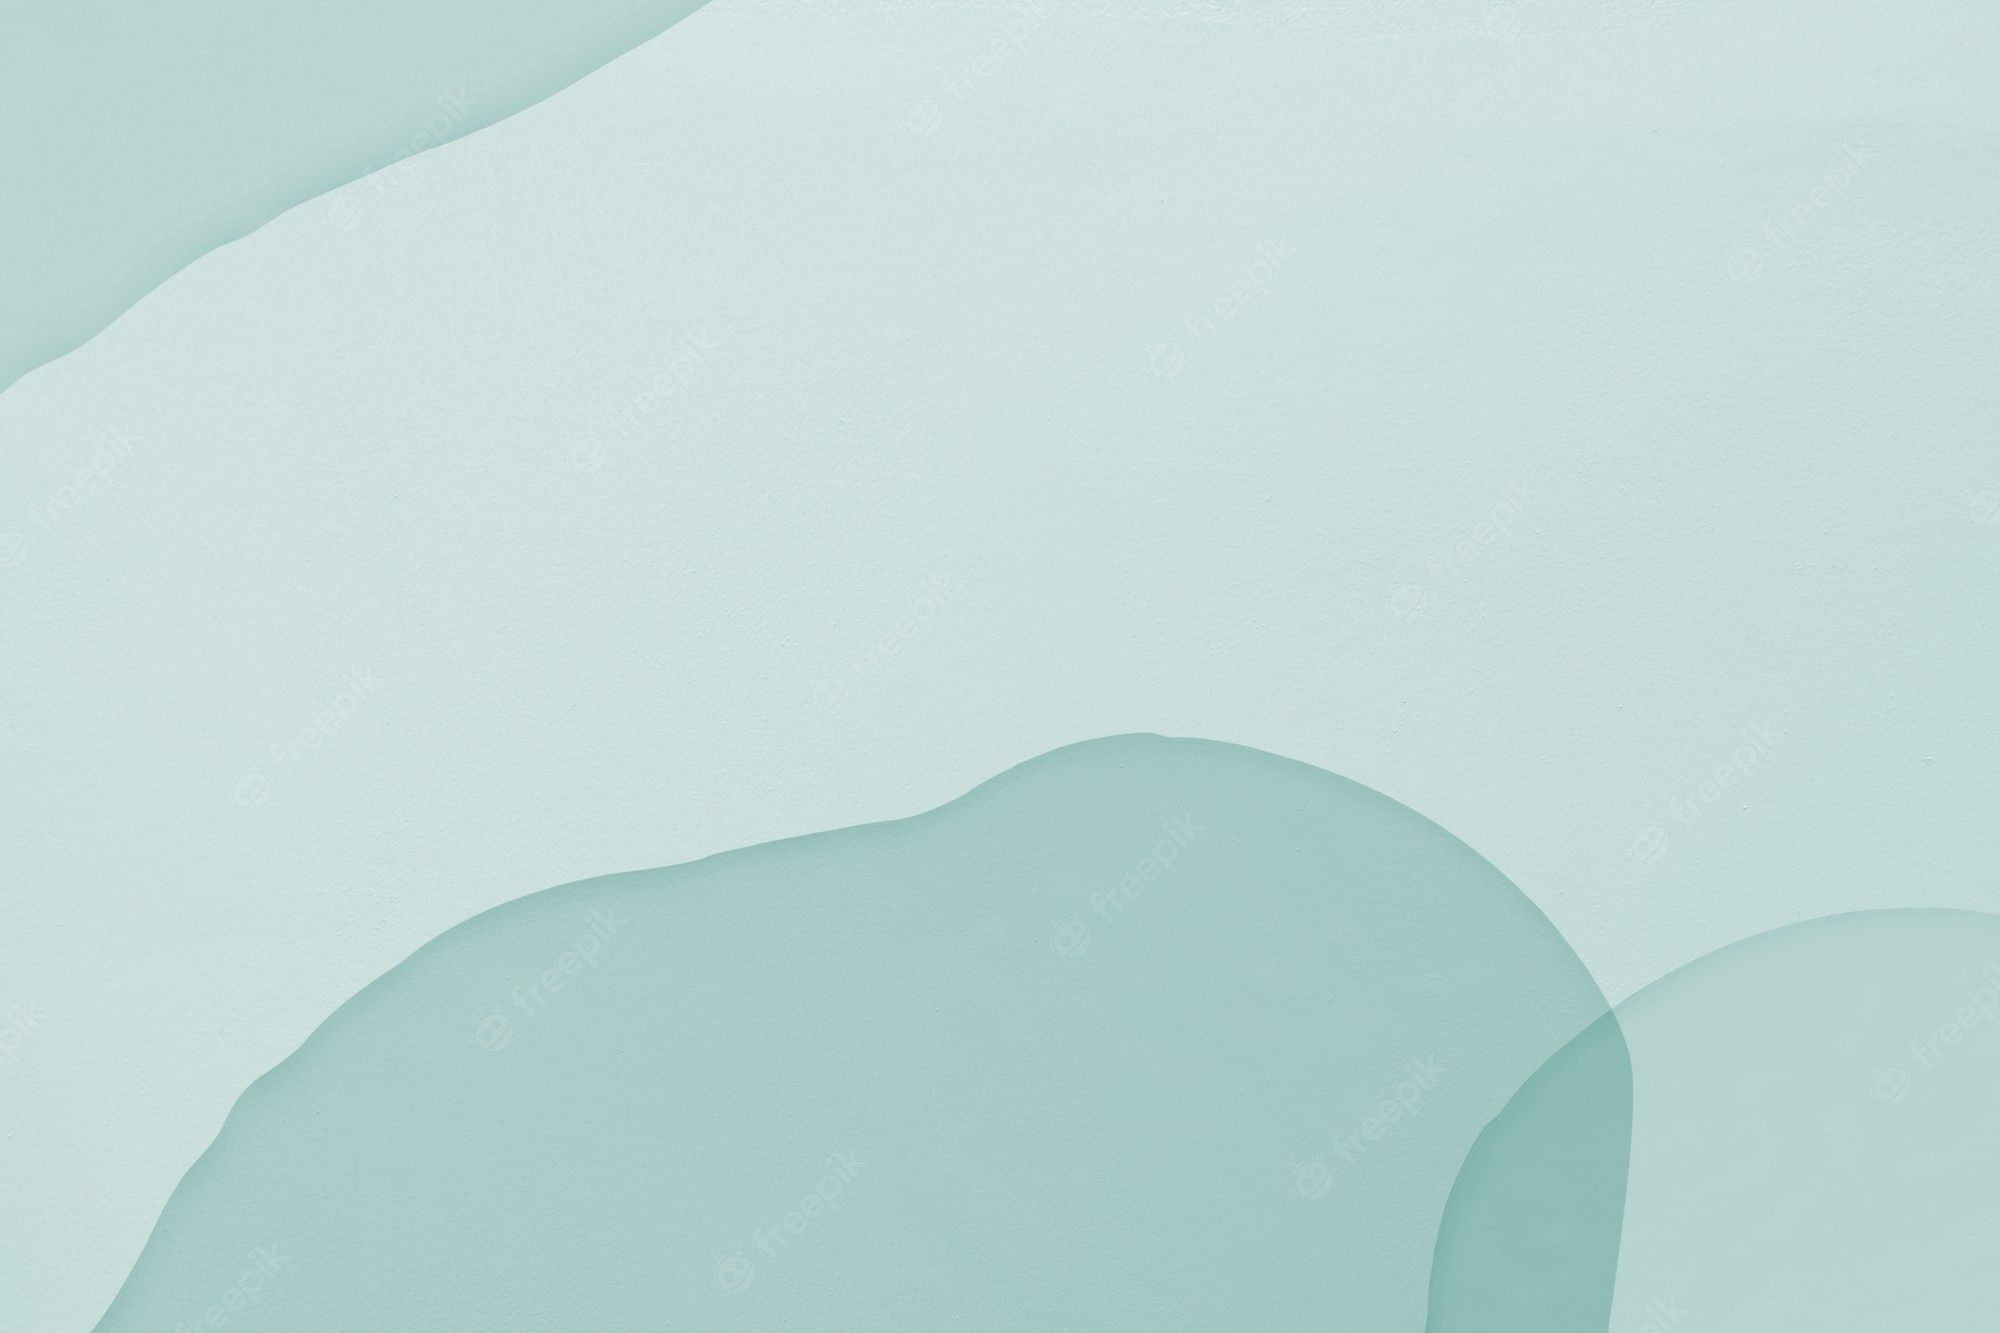 A soft green abstract background image - Mint green, teal